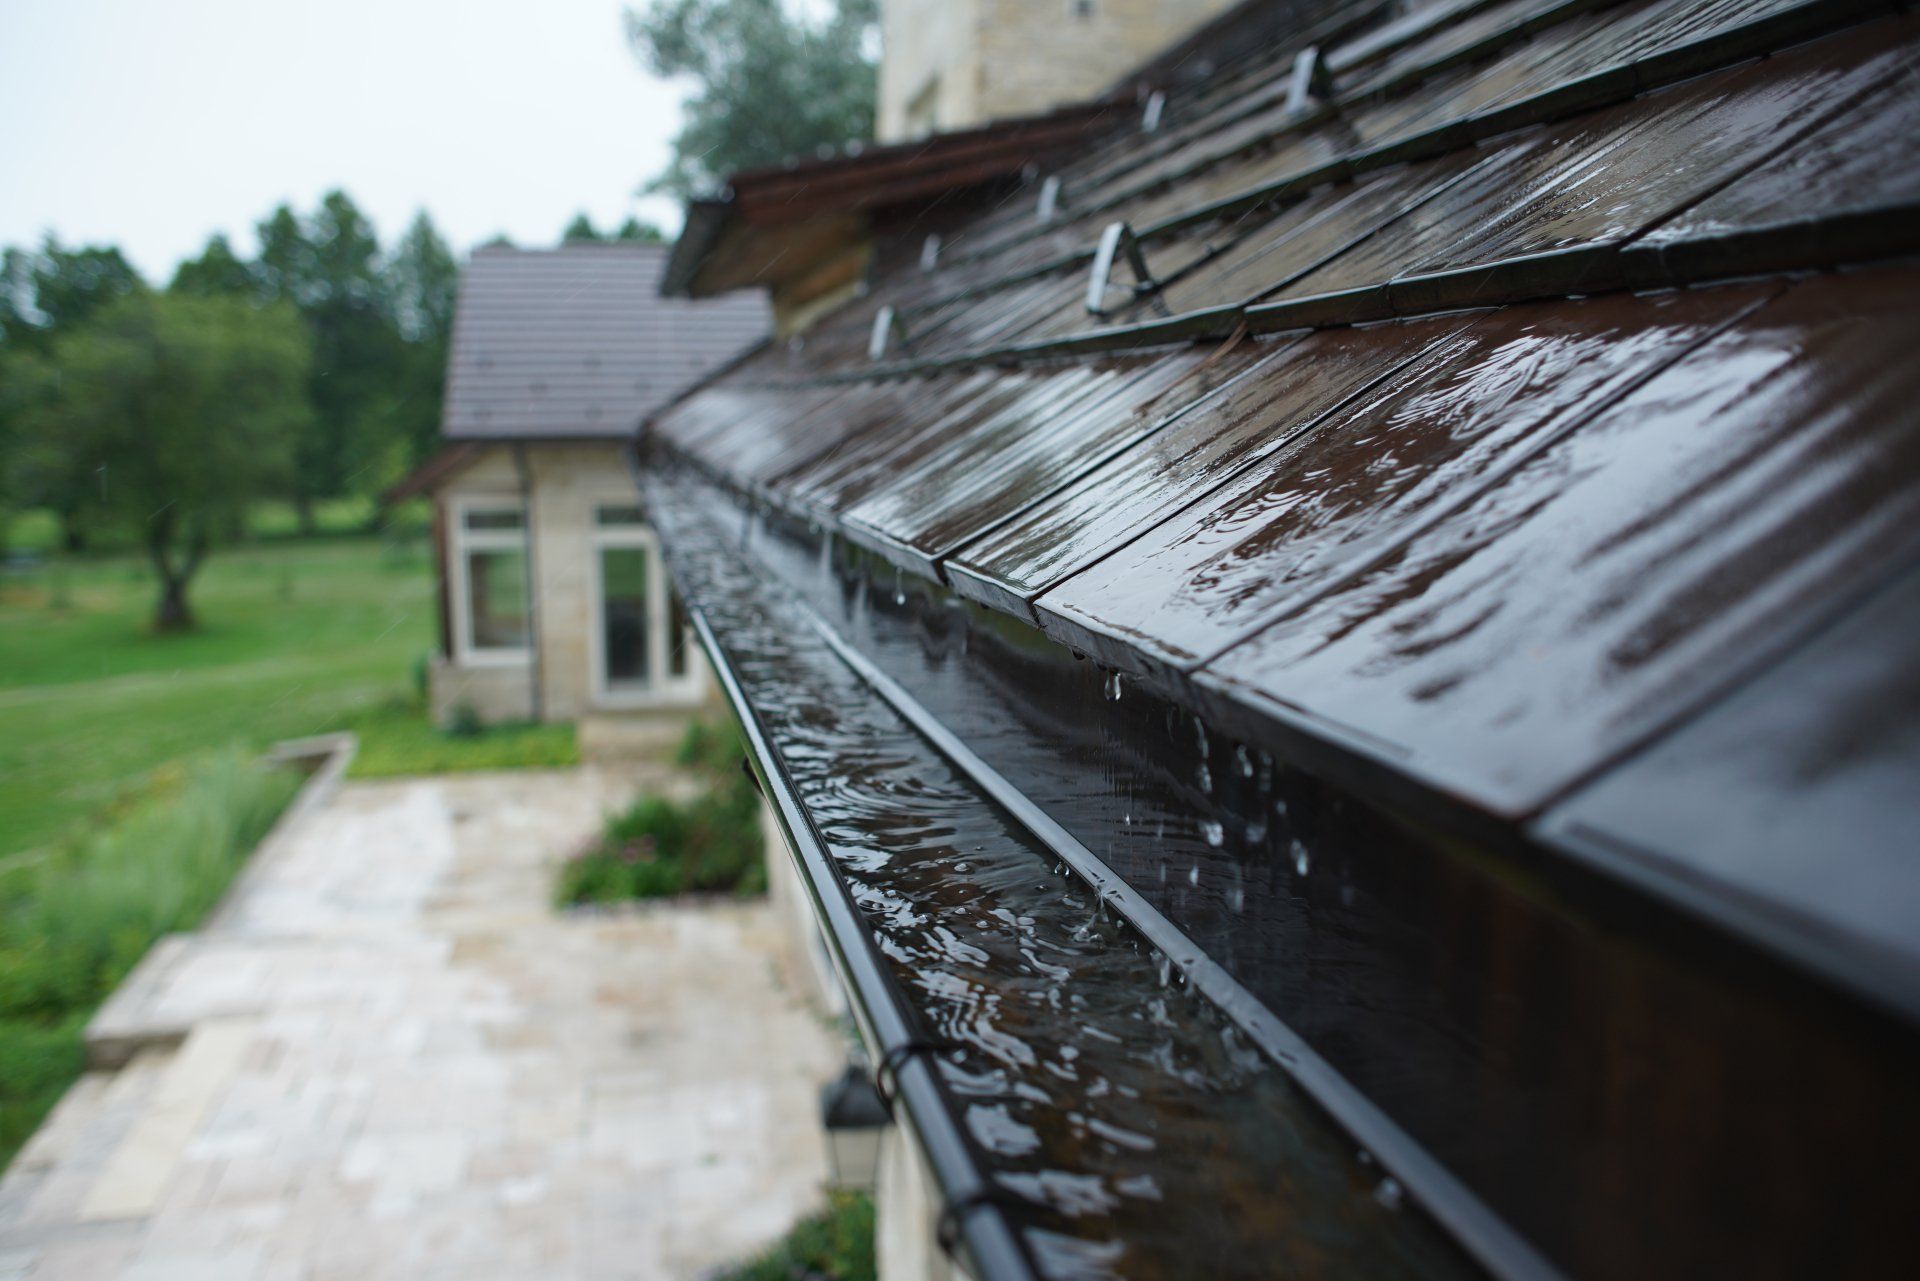 Premier Power Cleaning, Llc Gutter Cleaning Service Near Me Pittsburgh Pa